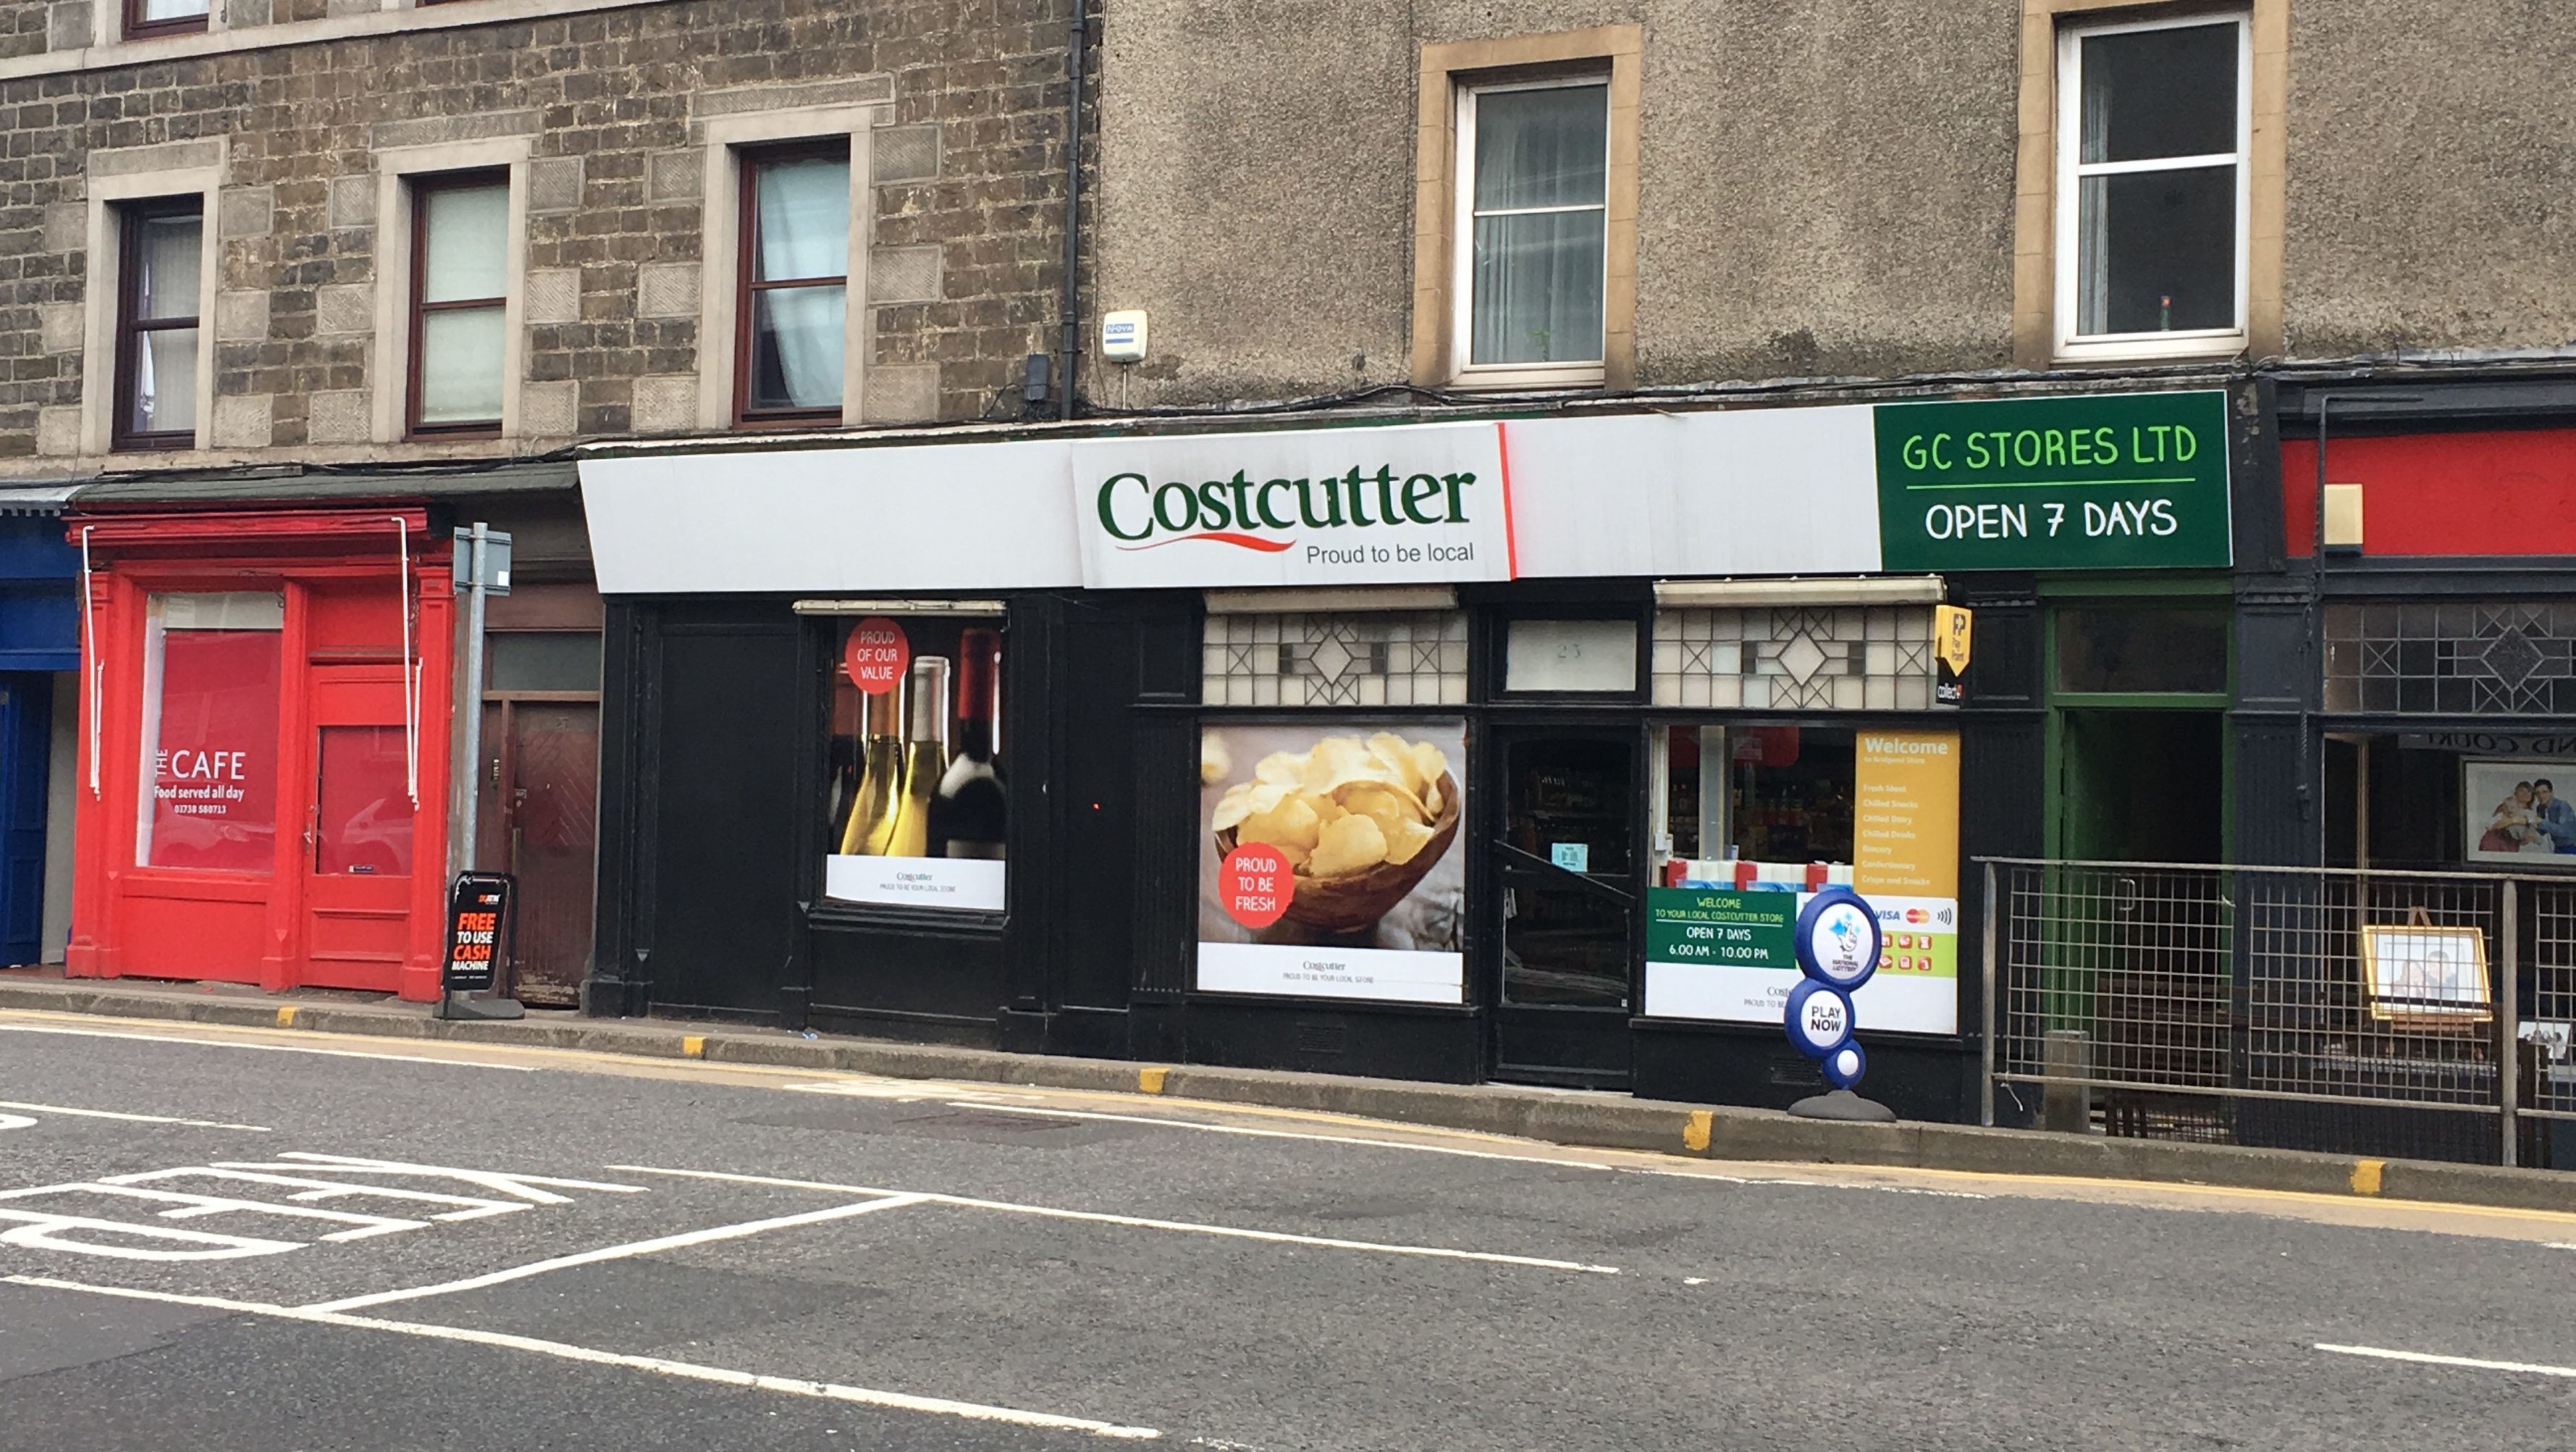 The Costcutter store which was targeted on Sunday night.